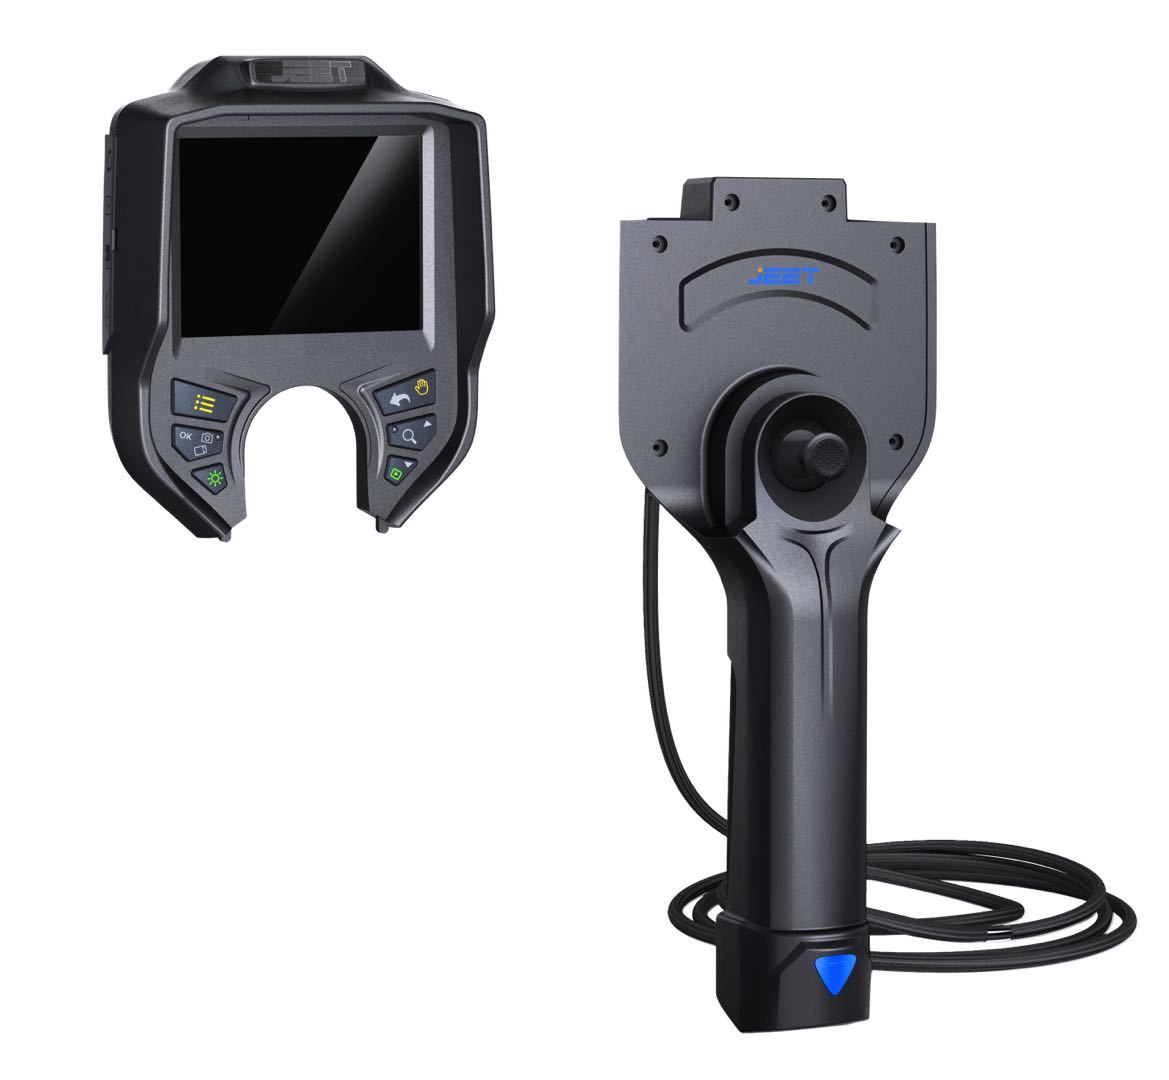 The main advantages of industrial video endoscopes